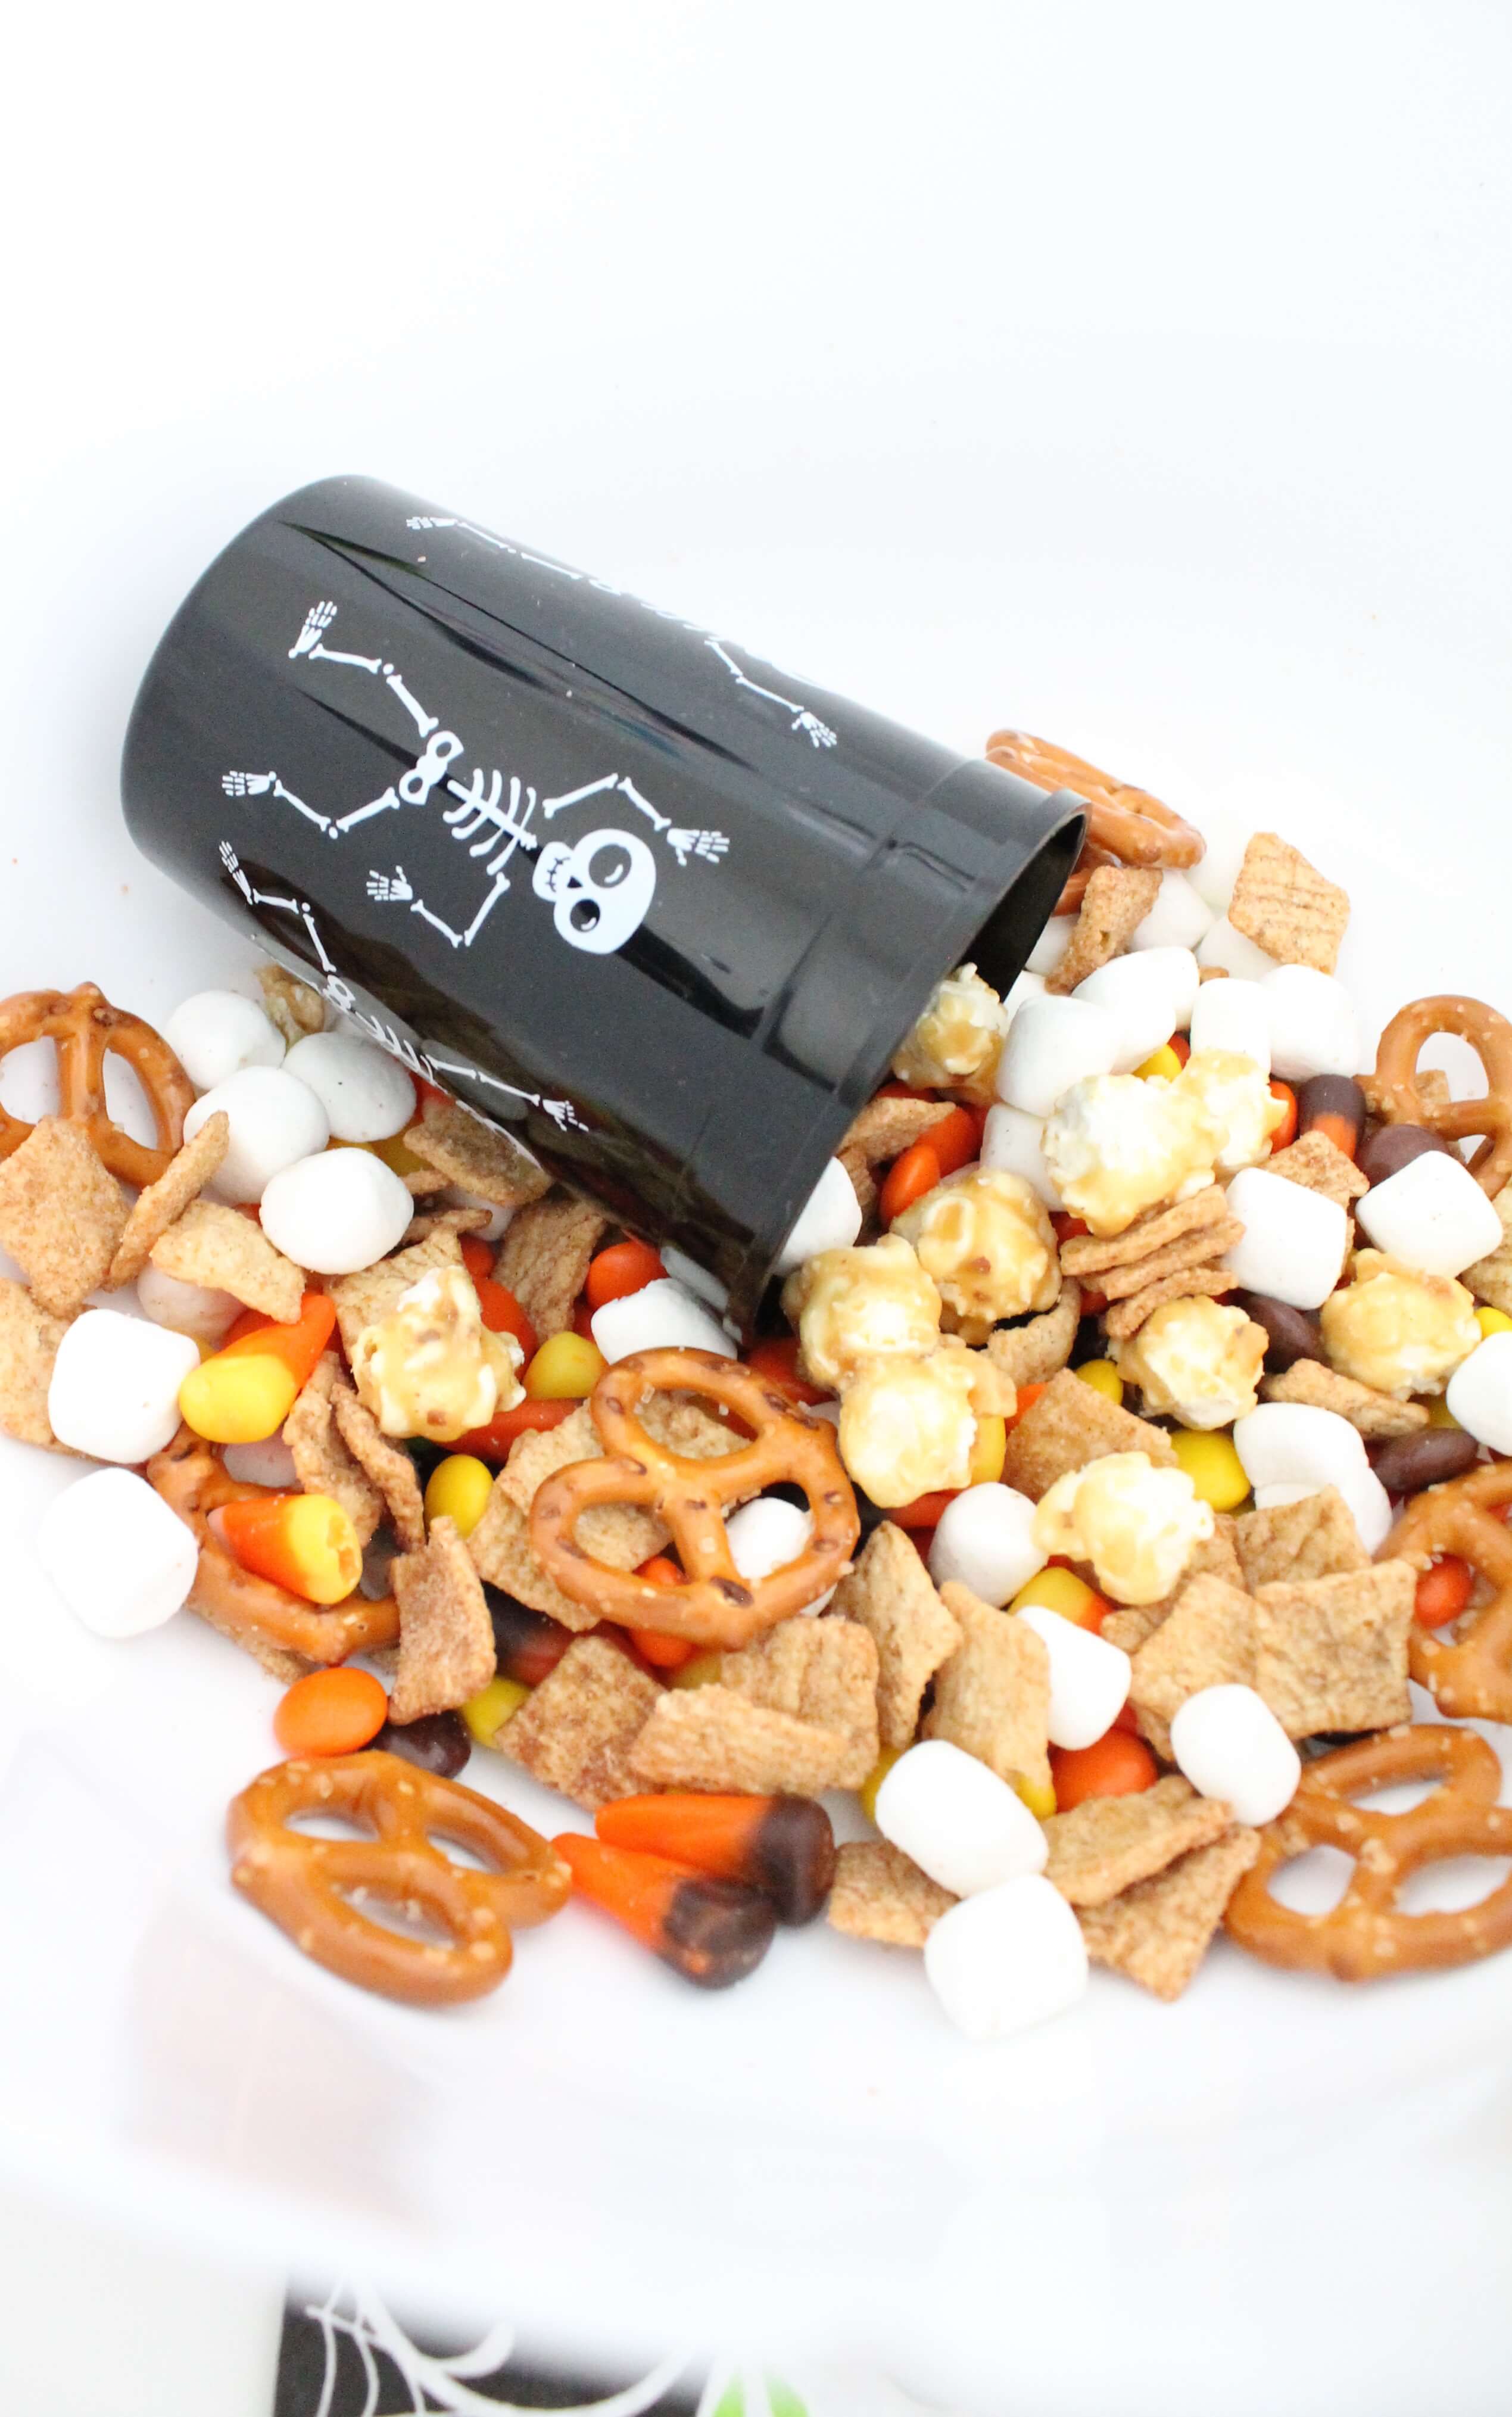 Kid-approved, fall-inspired snack mix. The perfect mix of salty and sweet. Perfect for party mix for Dia de los Muertos, Halloween, or any festive fall party. 